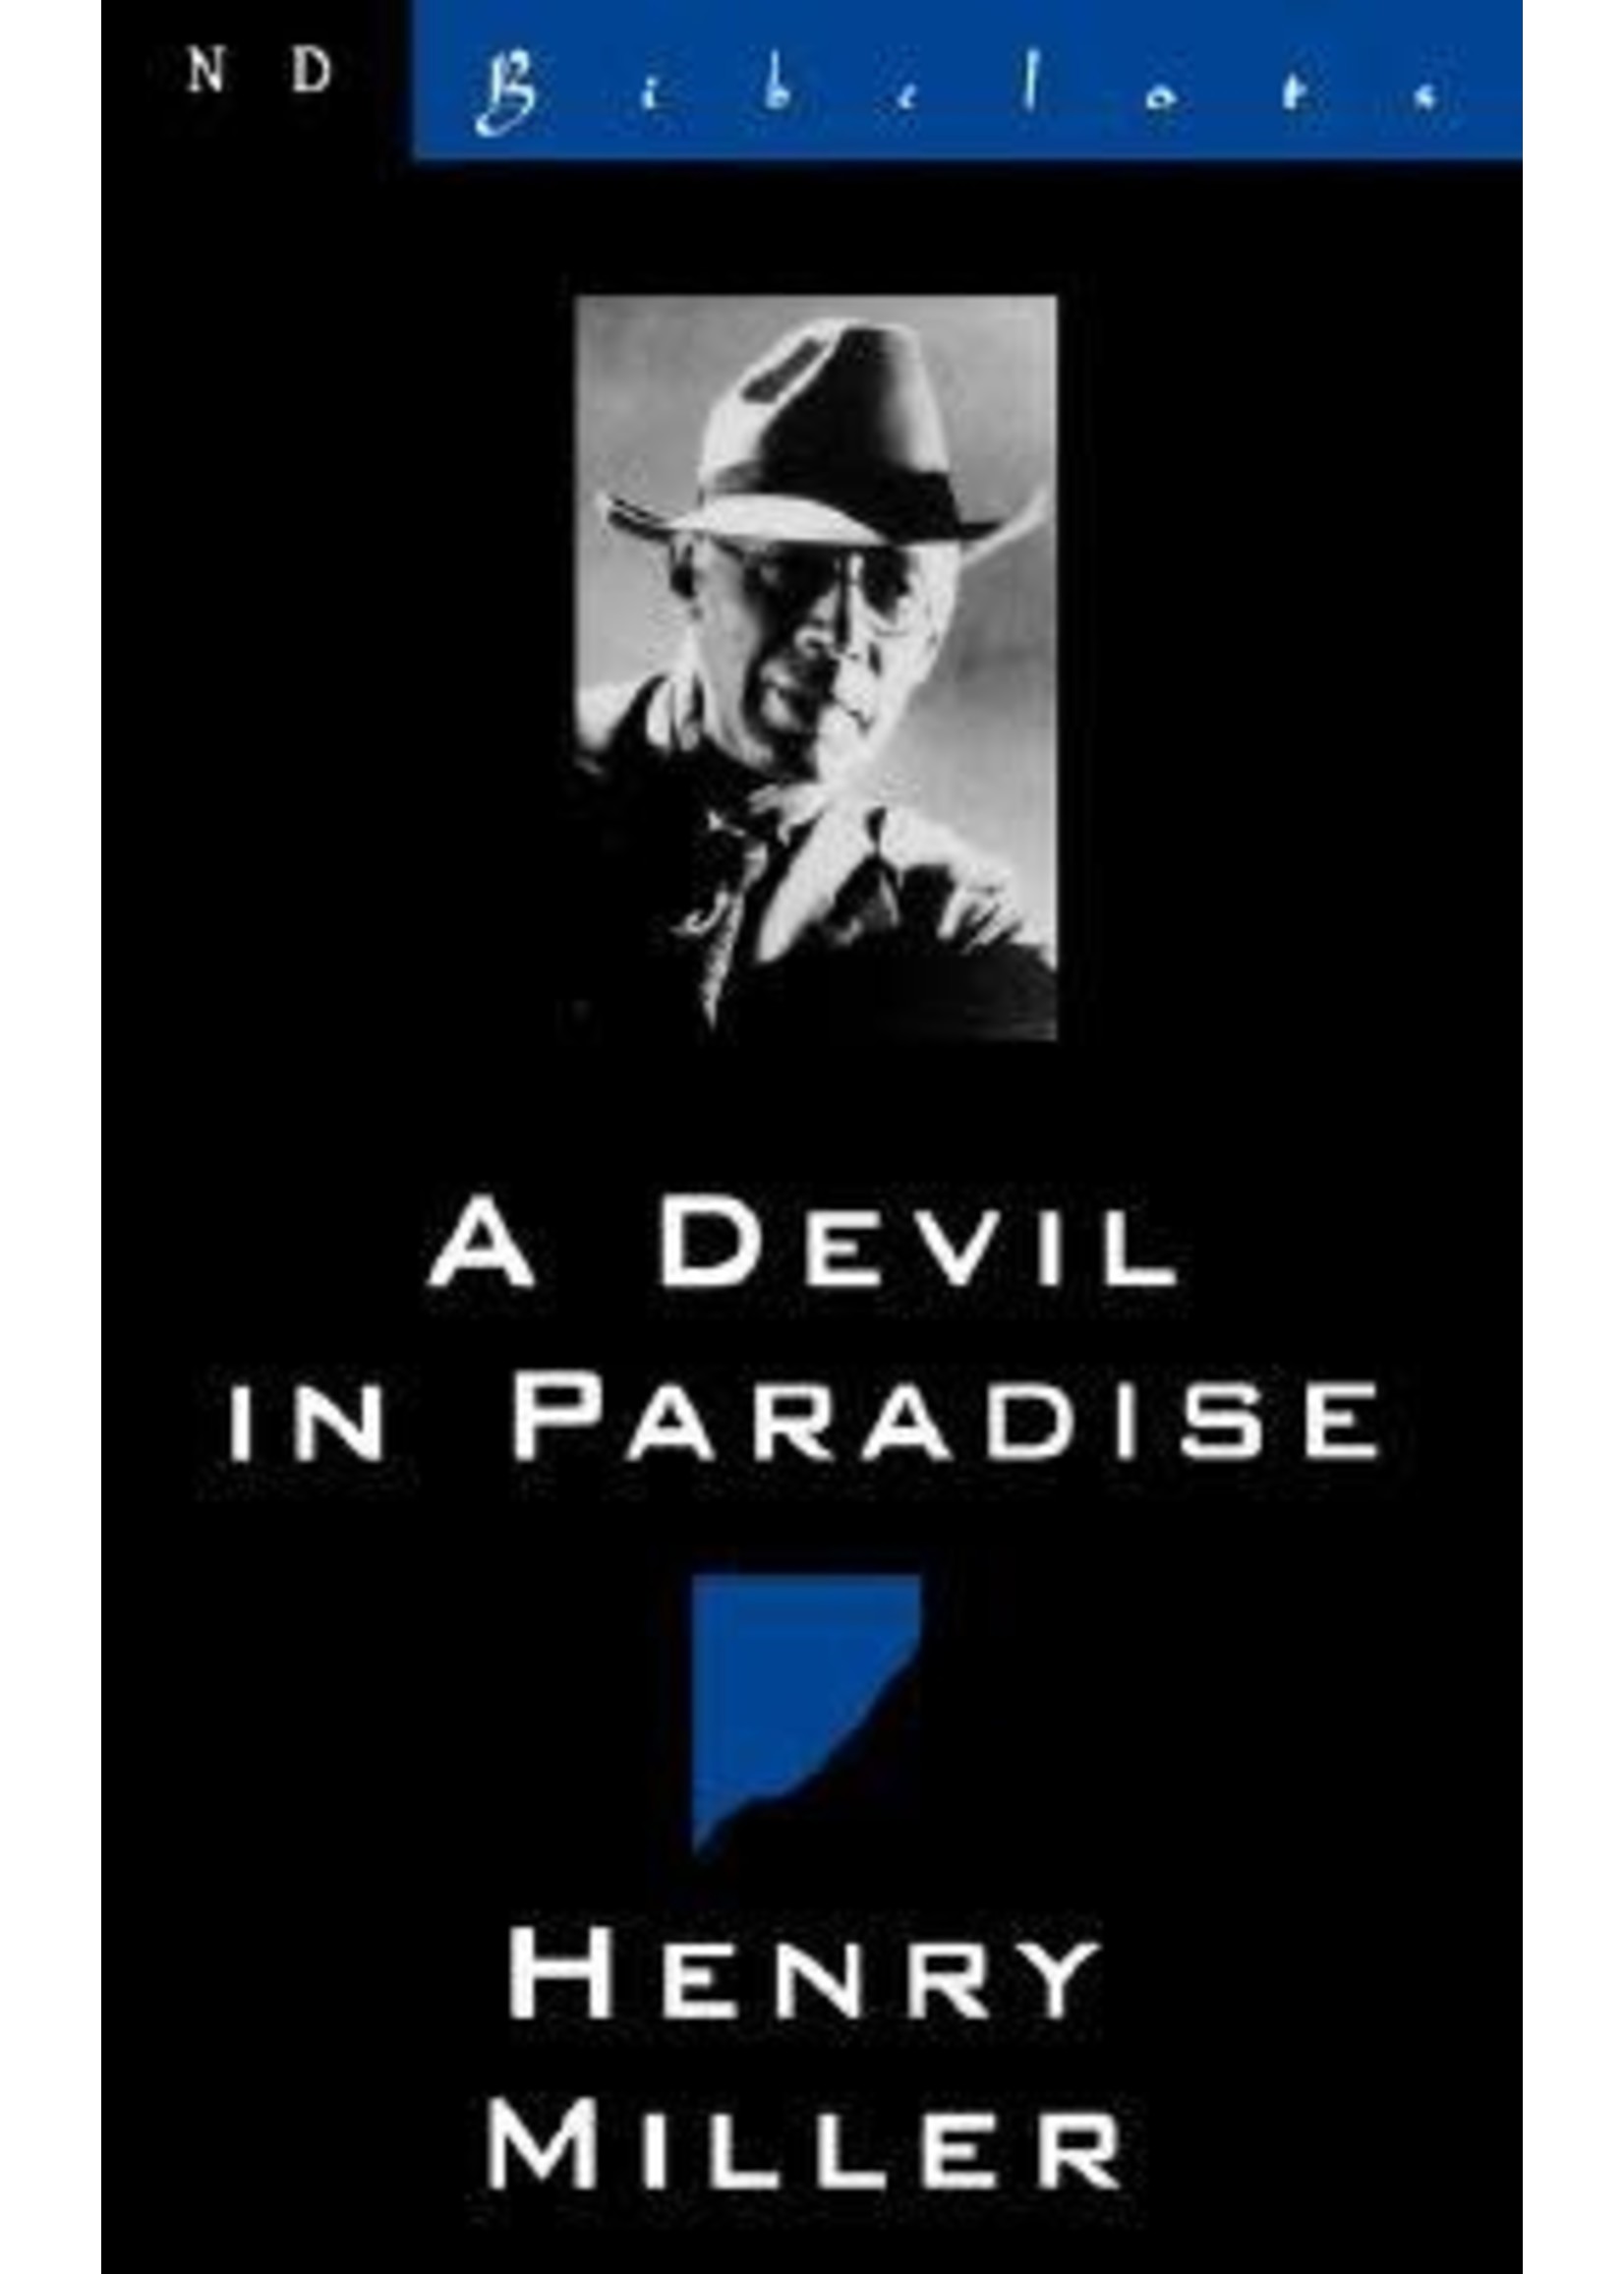 A Devil in Paradise by Henry Miller